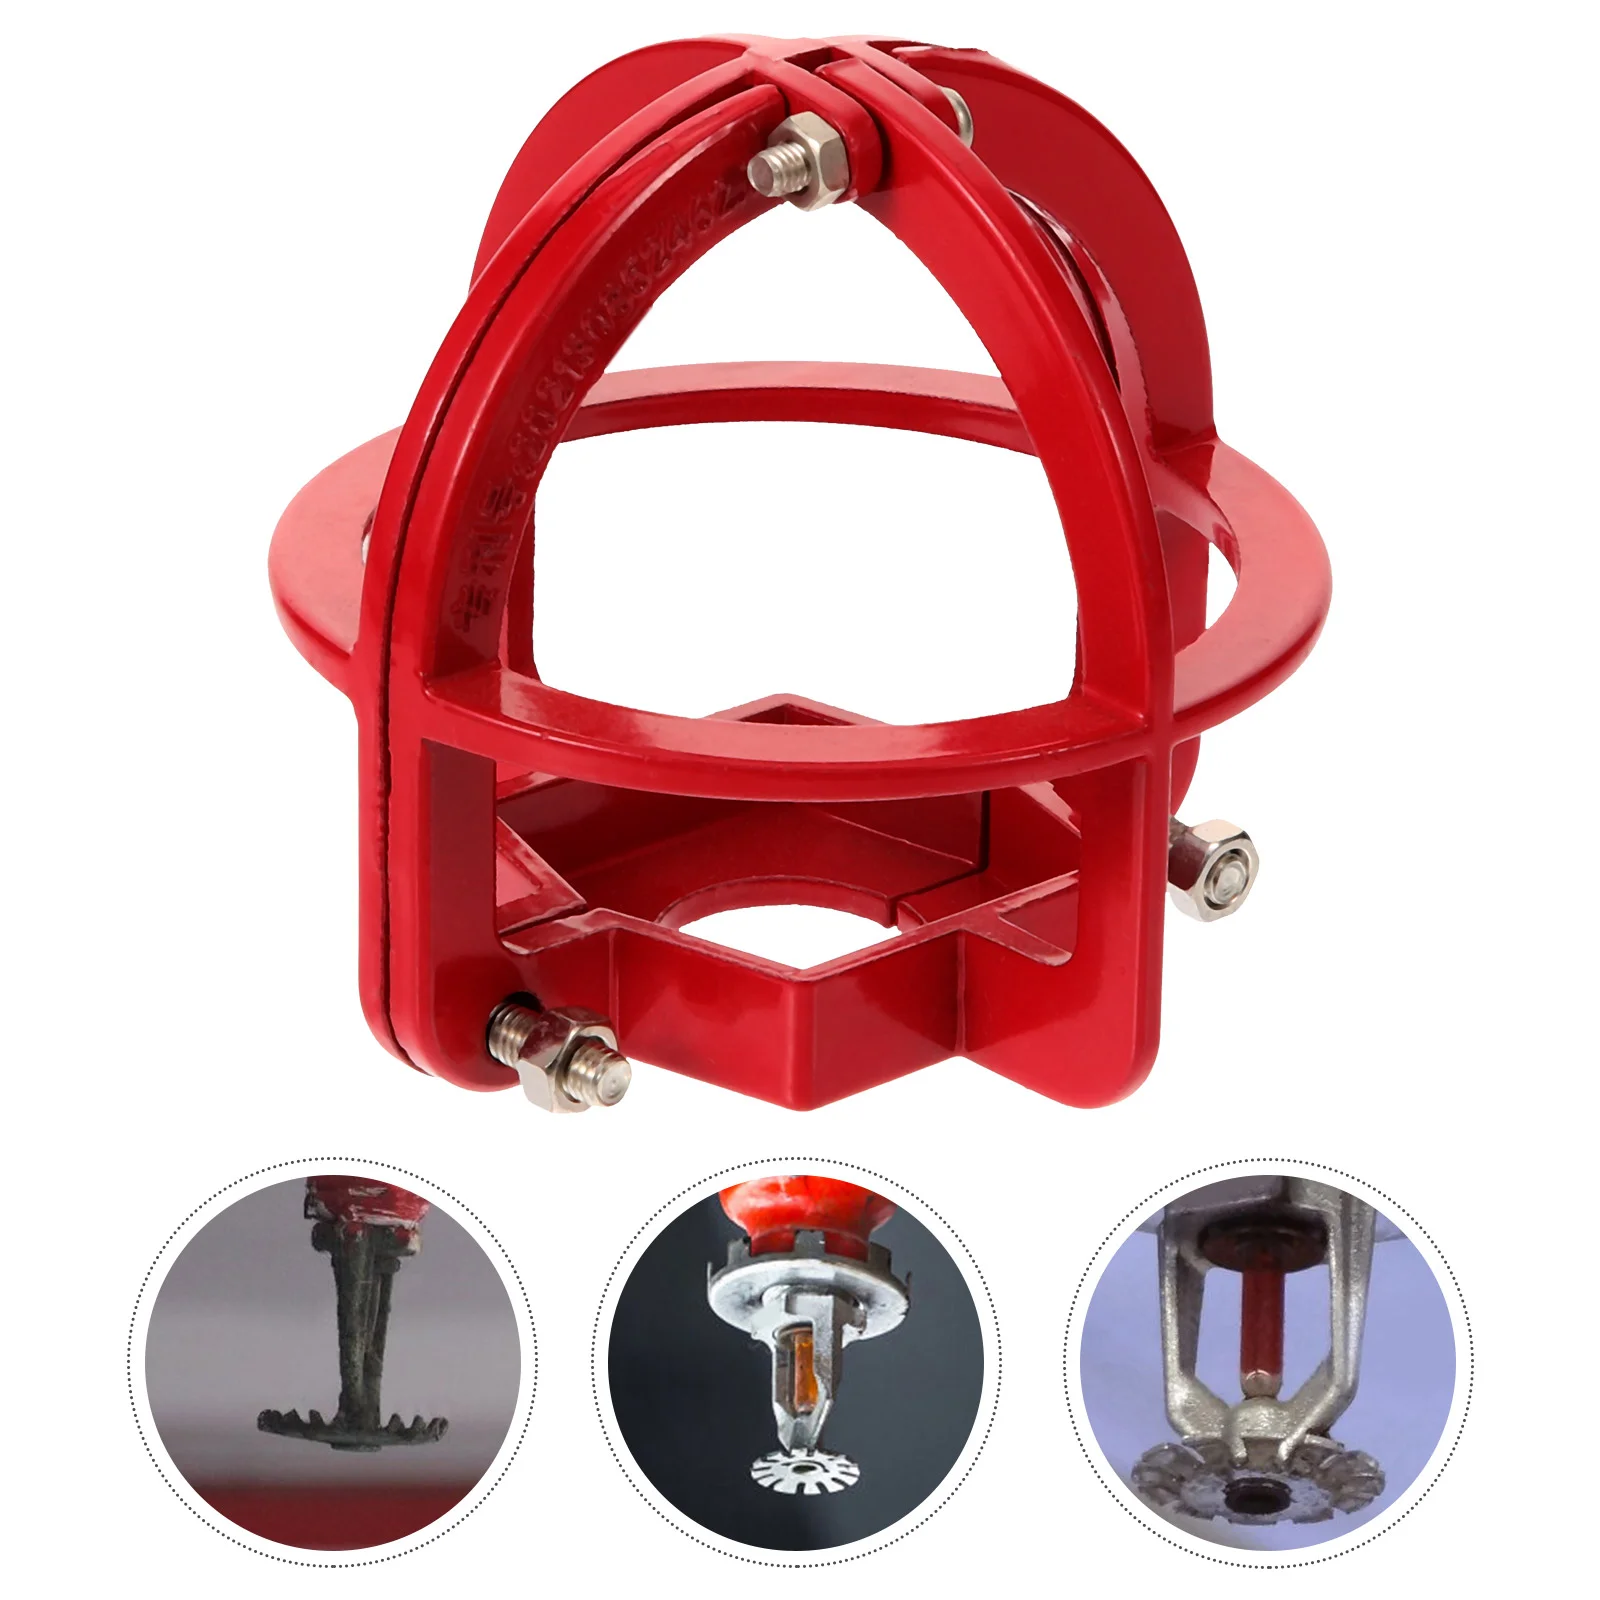 

Sprinkler Head Protection Frame Guards Protector head smoke sensor protective cover frame Protective Fire Cover Red Covers